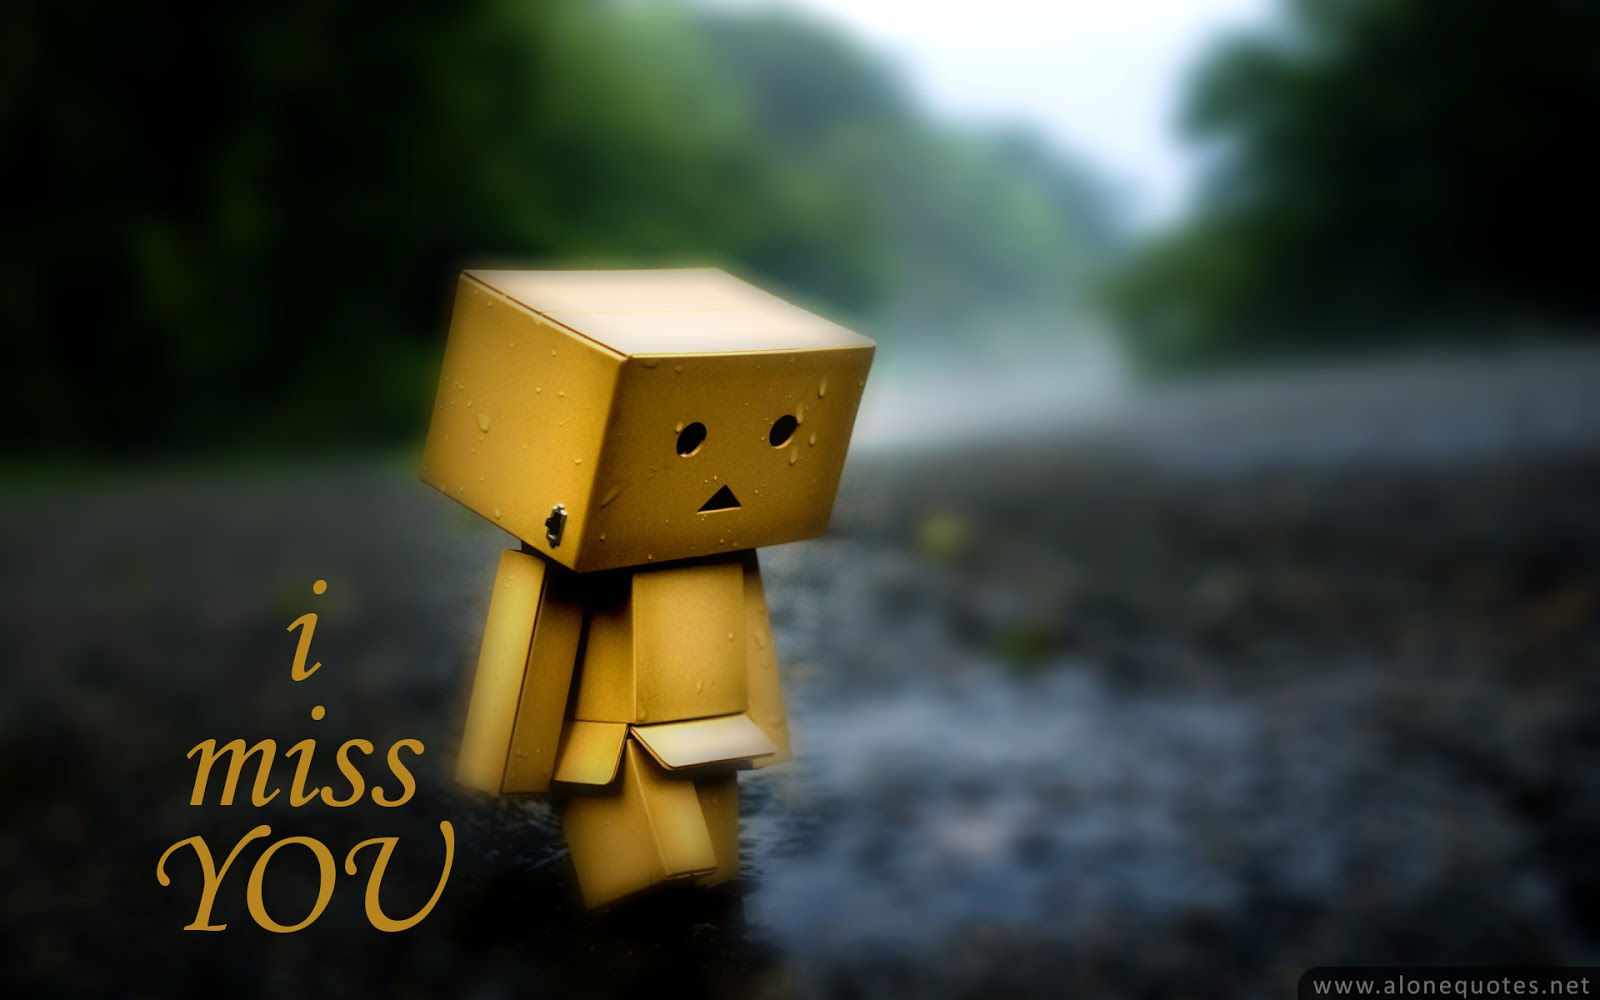 miss you hd wallpapers i miss you high quality wallpapers 1600x1000